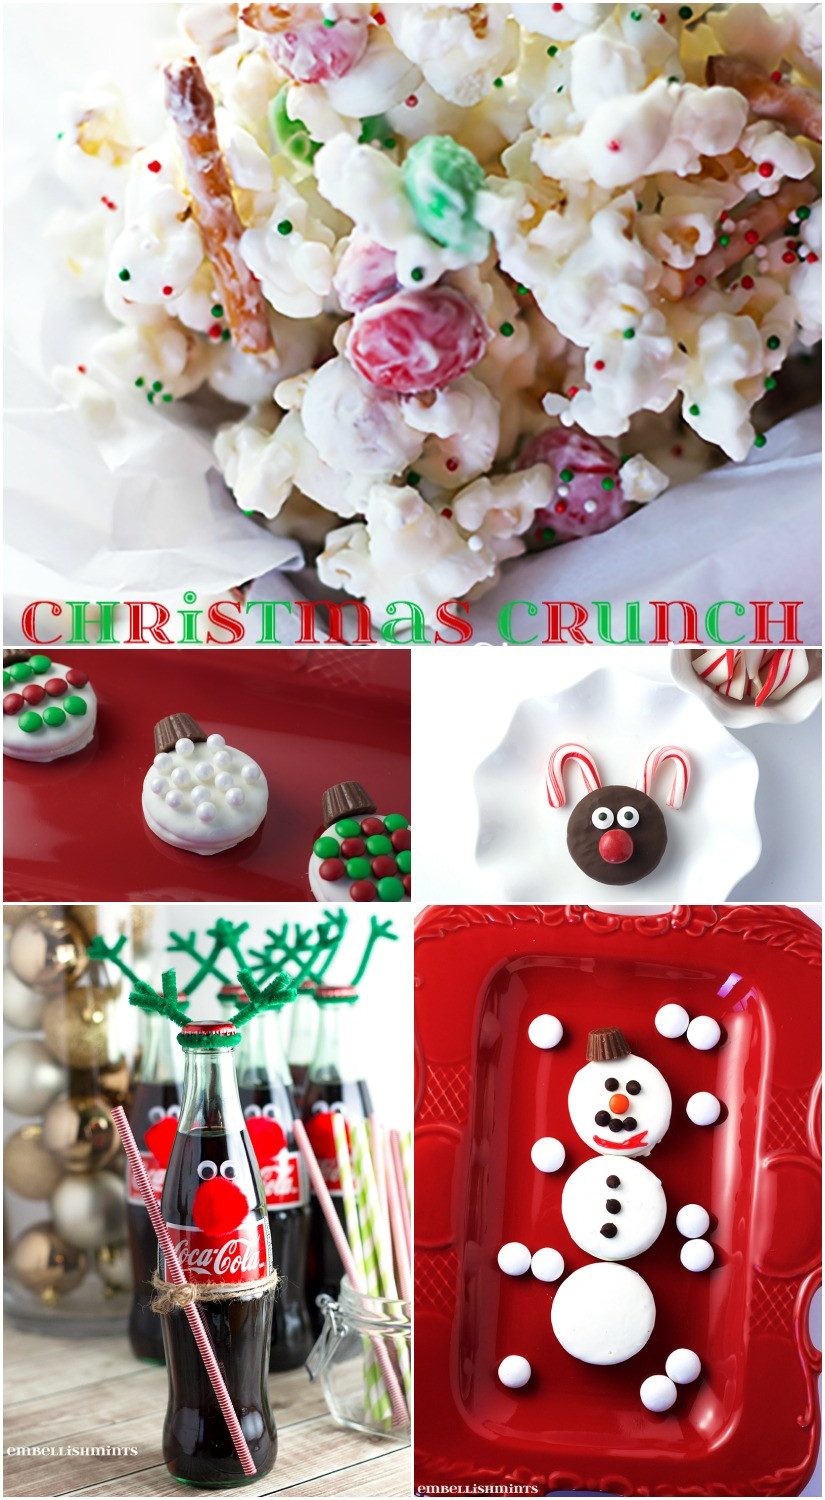 Holiday Food Ideas Christmas Party
 Christmas Party Food Ideas For Kids Embellishmints